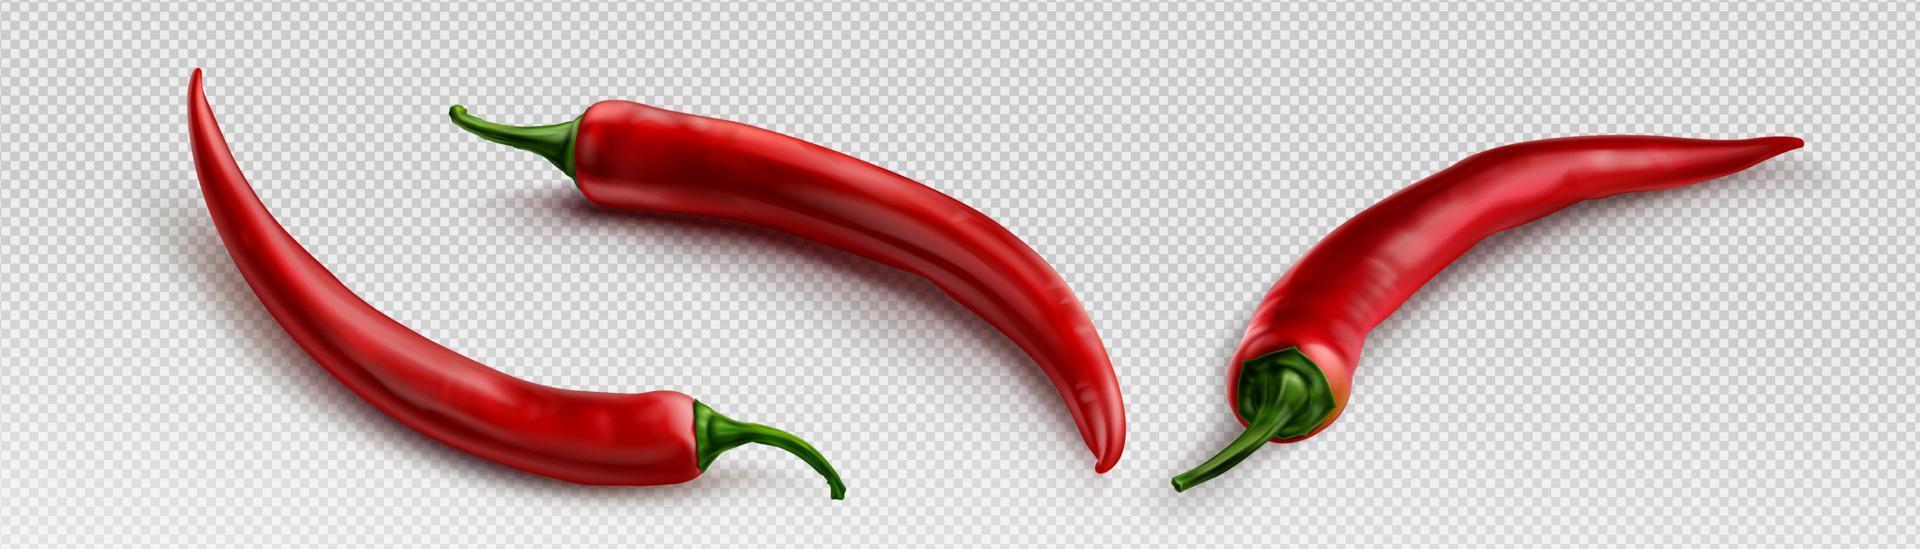 Chili peper realistisch 3d, transparant achtergrond vector